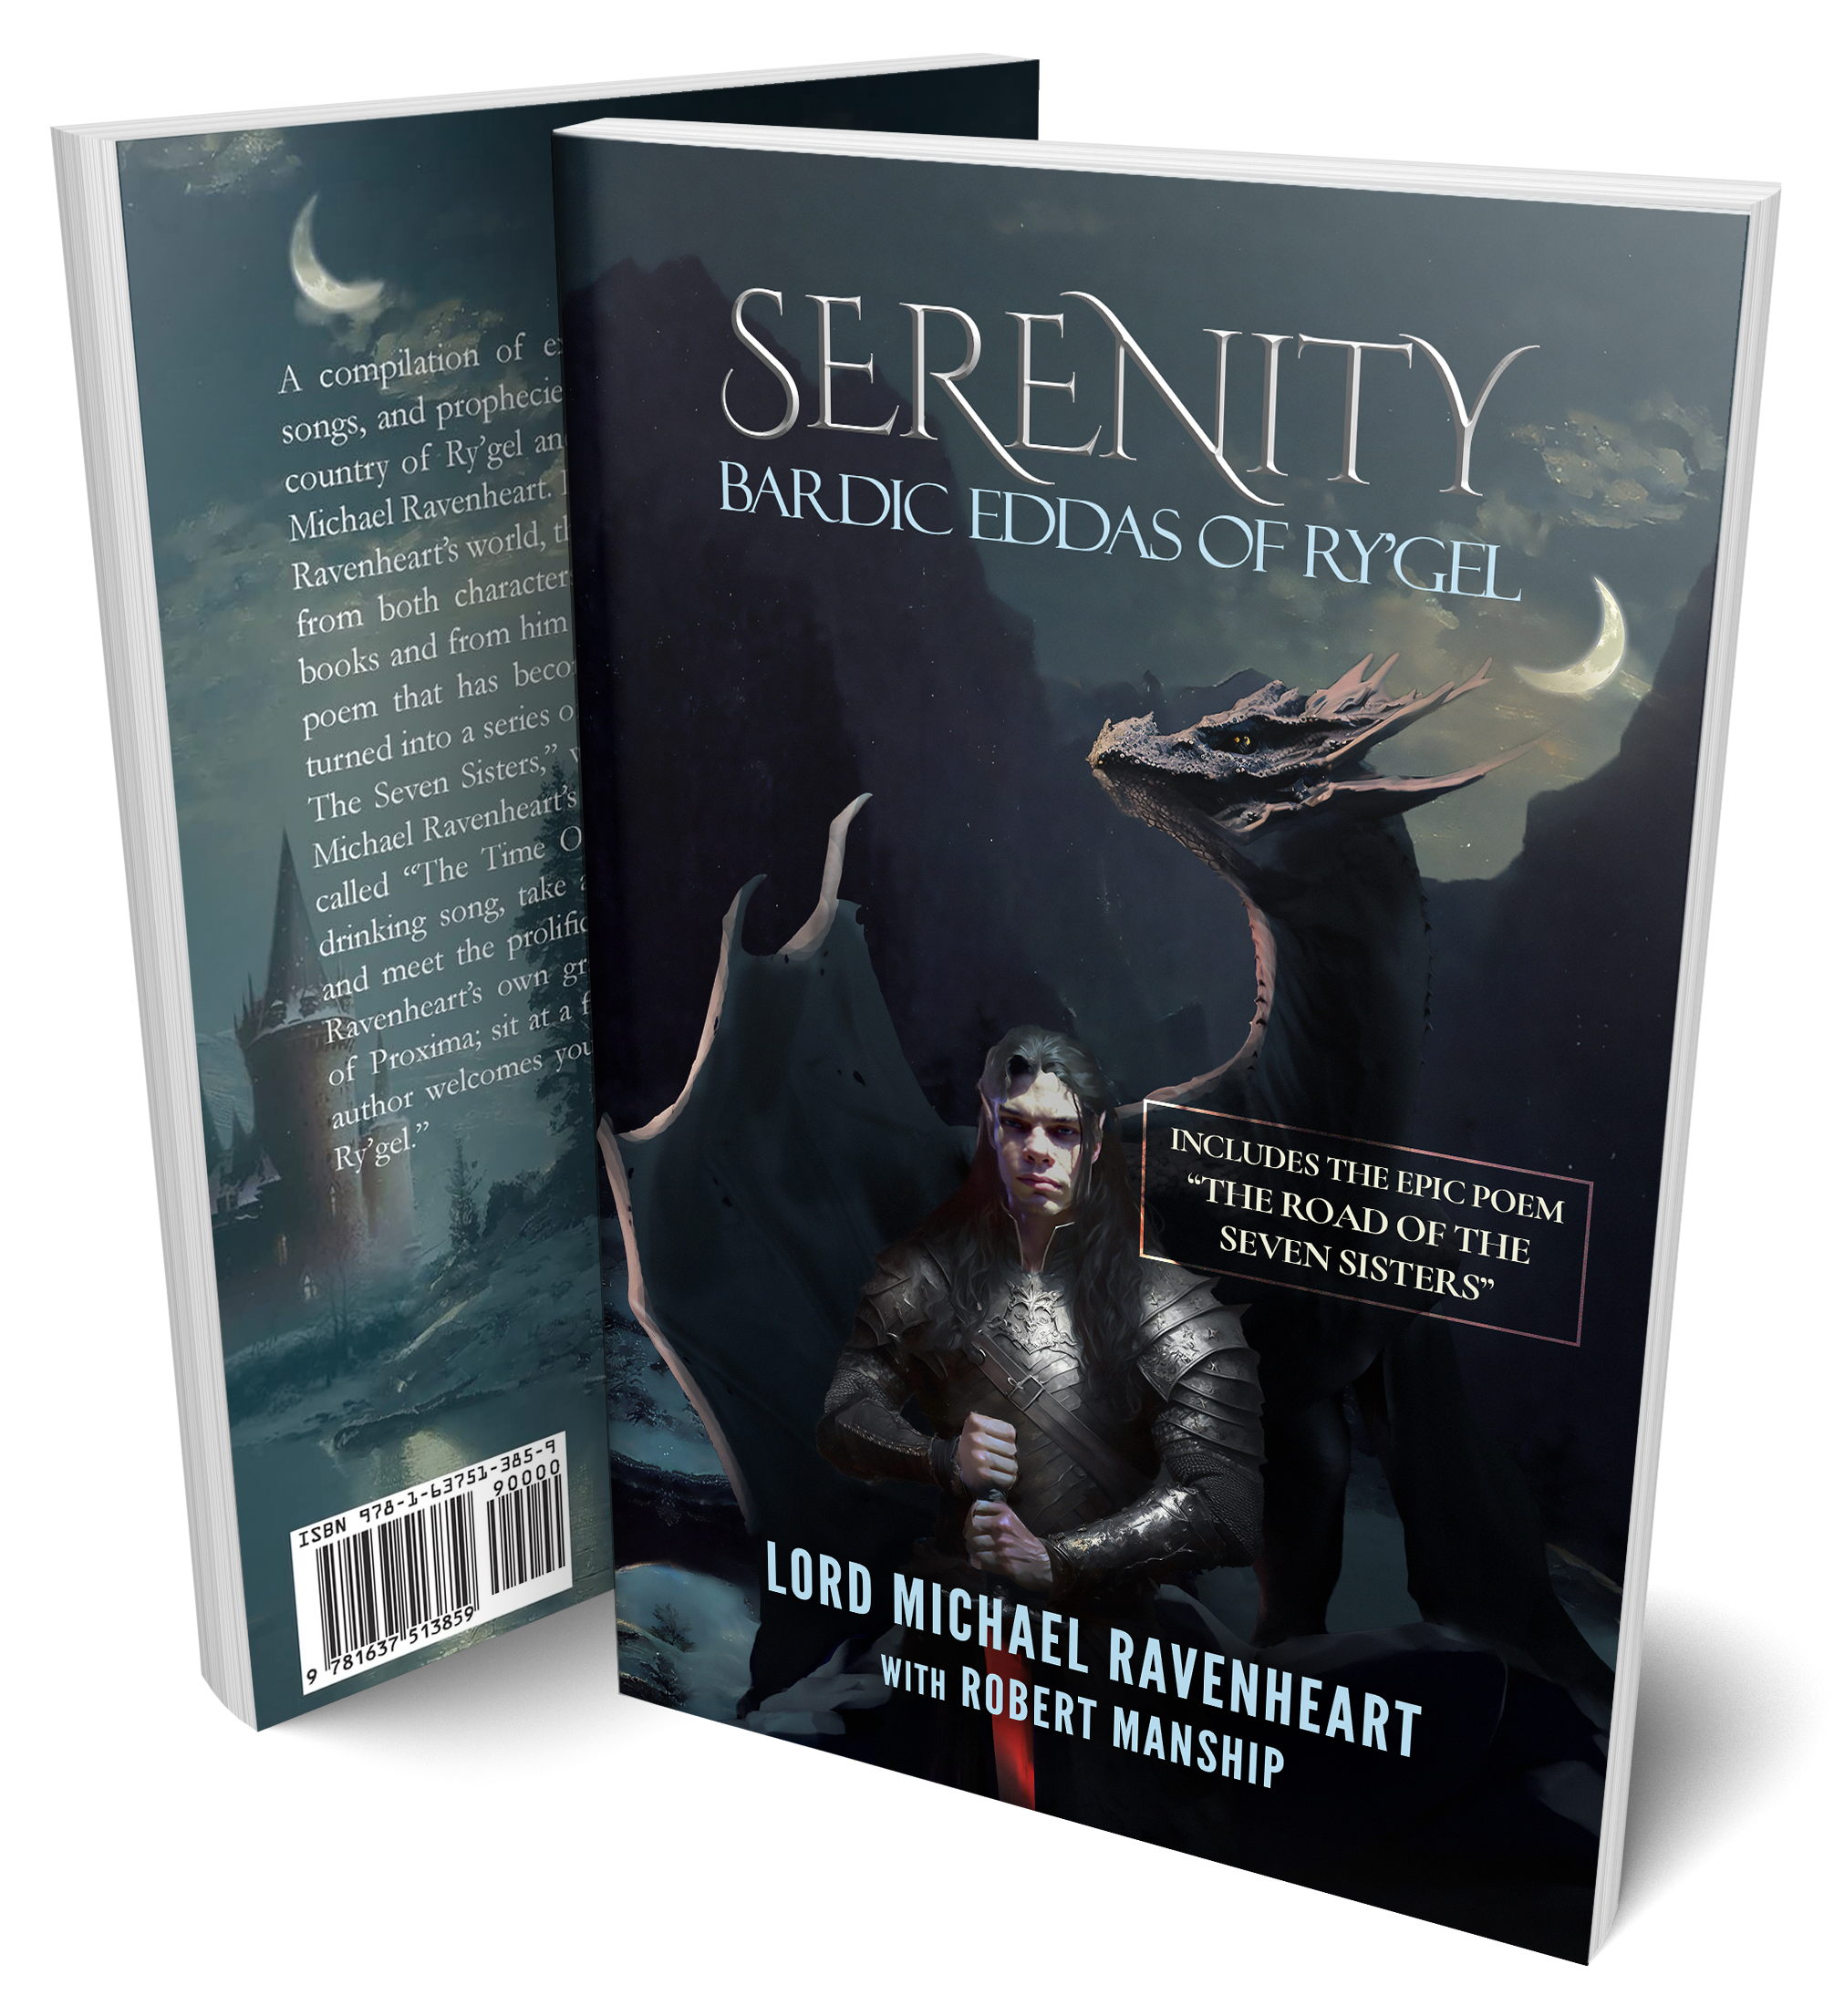 Cover of 'Serenity: Bardic Eddas of Ry'gel' by Lord Michael Ravenheart